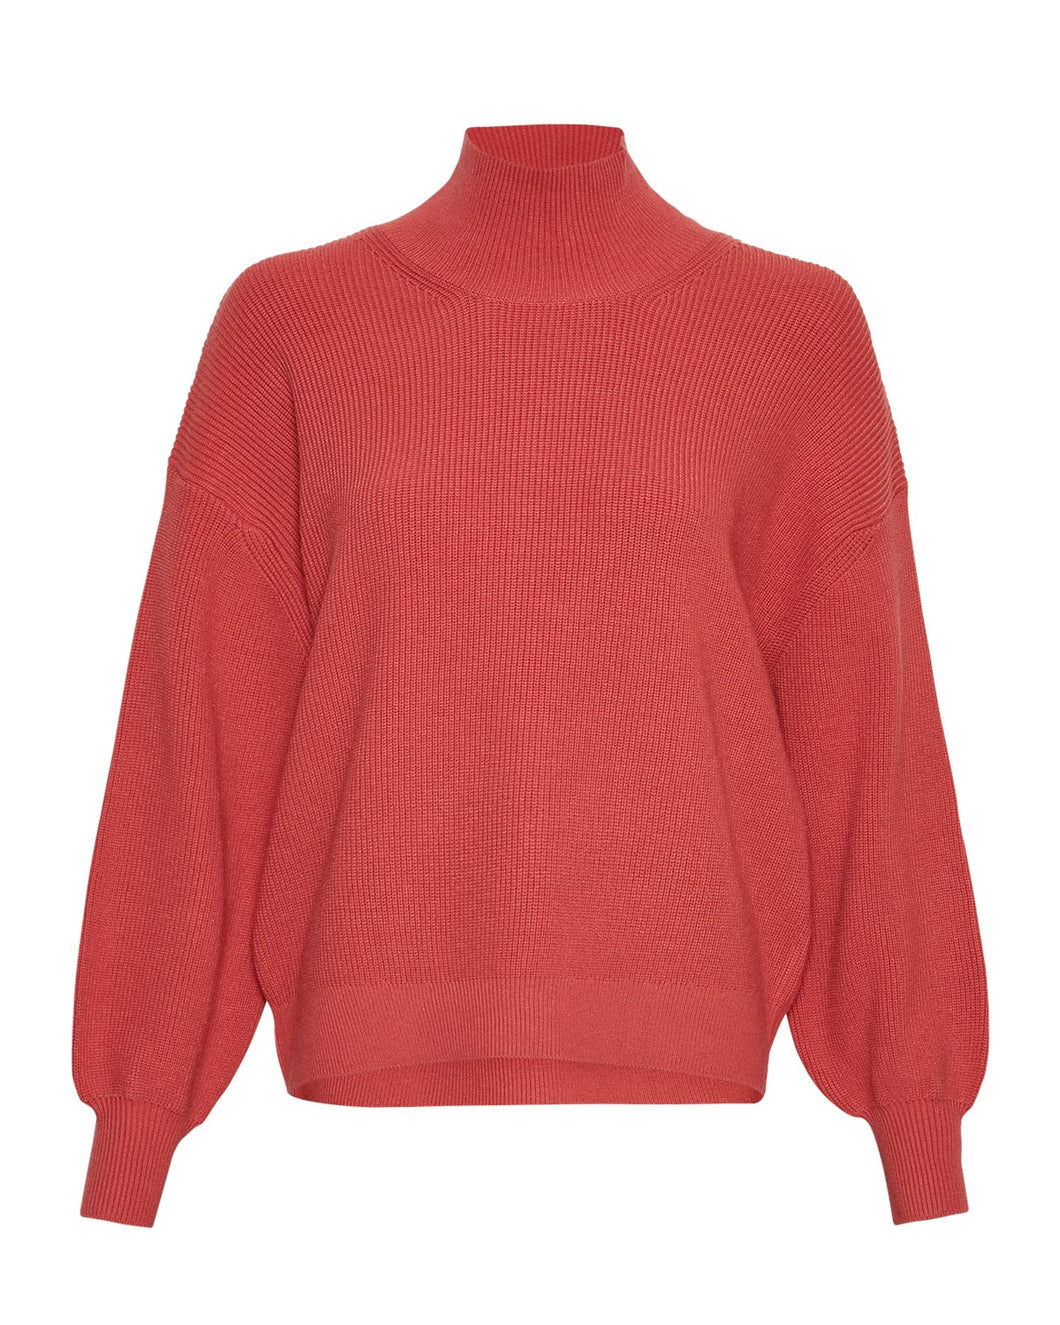 MSCHMagnea Rachelle Pullover, mineral red